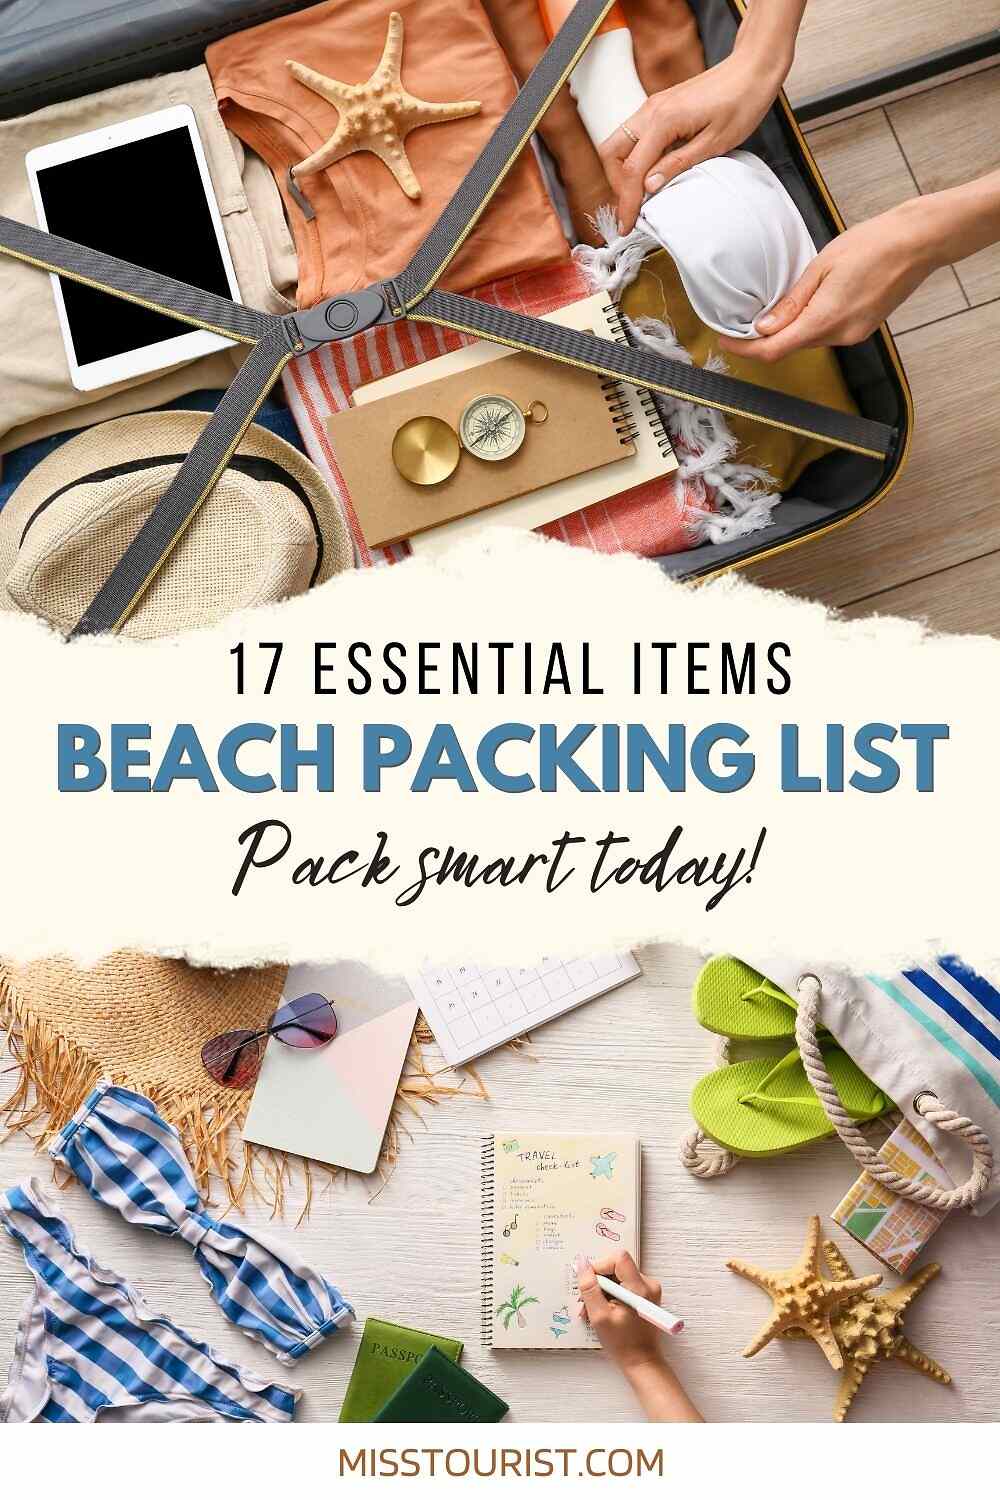 A packed suitcase with beach essentials, including a hat, sunglasses, flip-flops, a camera, and toiletries, next to a checklist titled "17 Essential Items Beach Packing List.